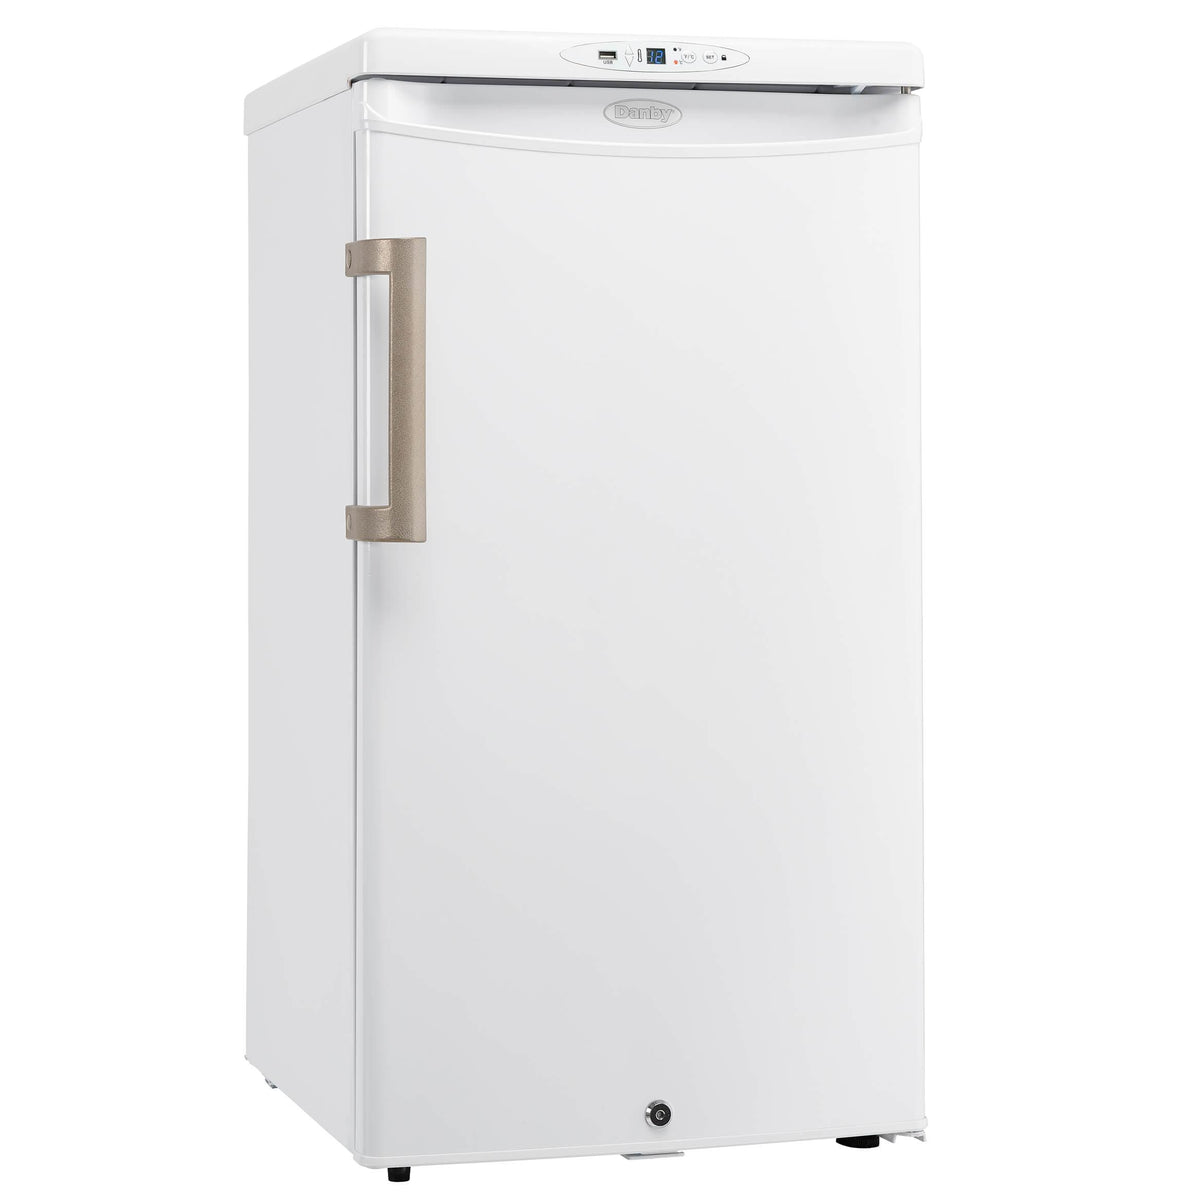 17-inch, 3.2 cu.ft. Freestanding Compact Refrigerator with USB Port DH032A1W IMAGE 1